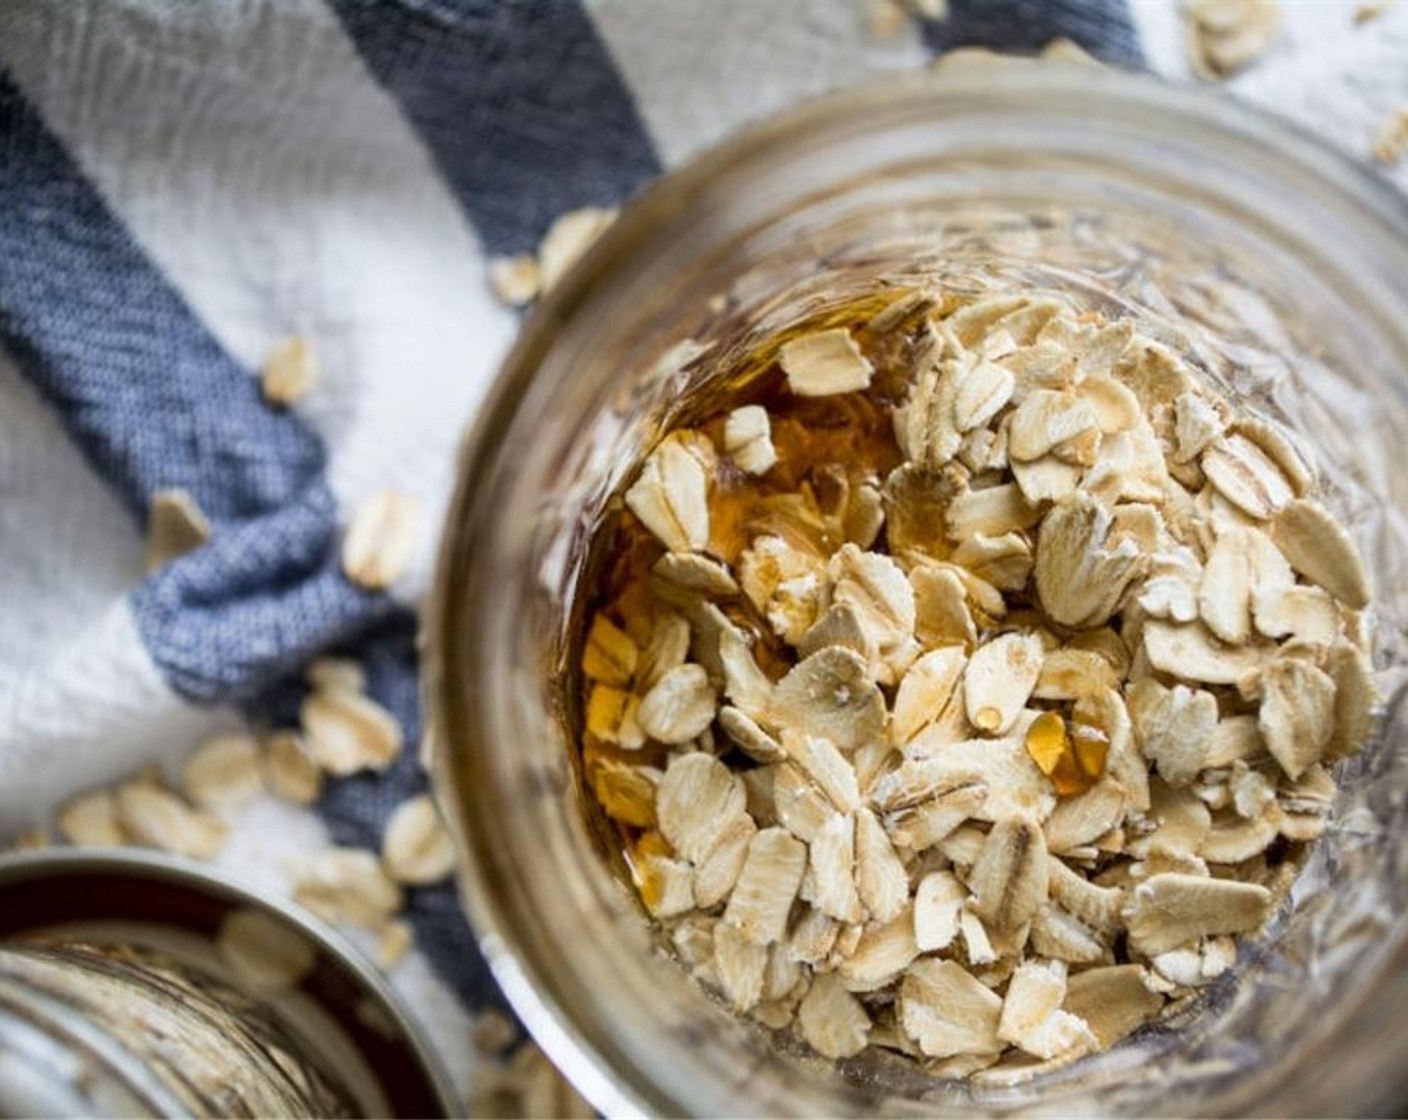 step 1 With an 8 ounce mason jar, begin by adding Oats (1/2 cup).